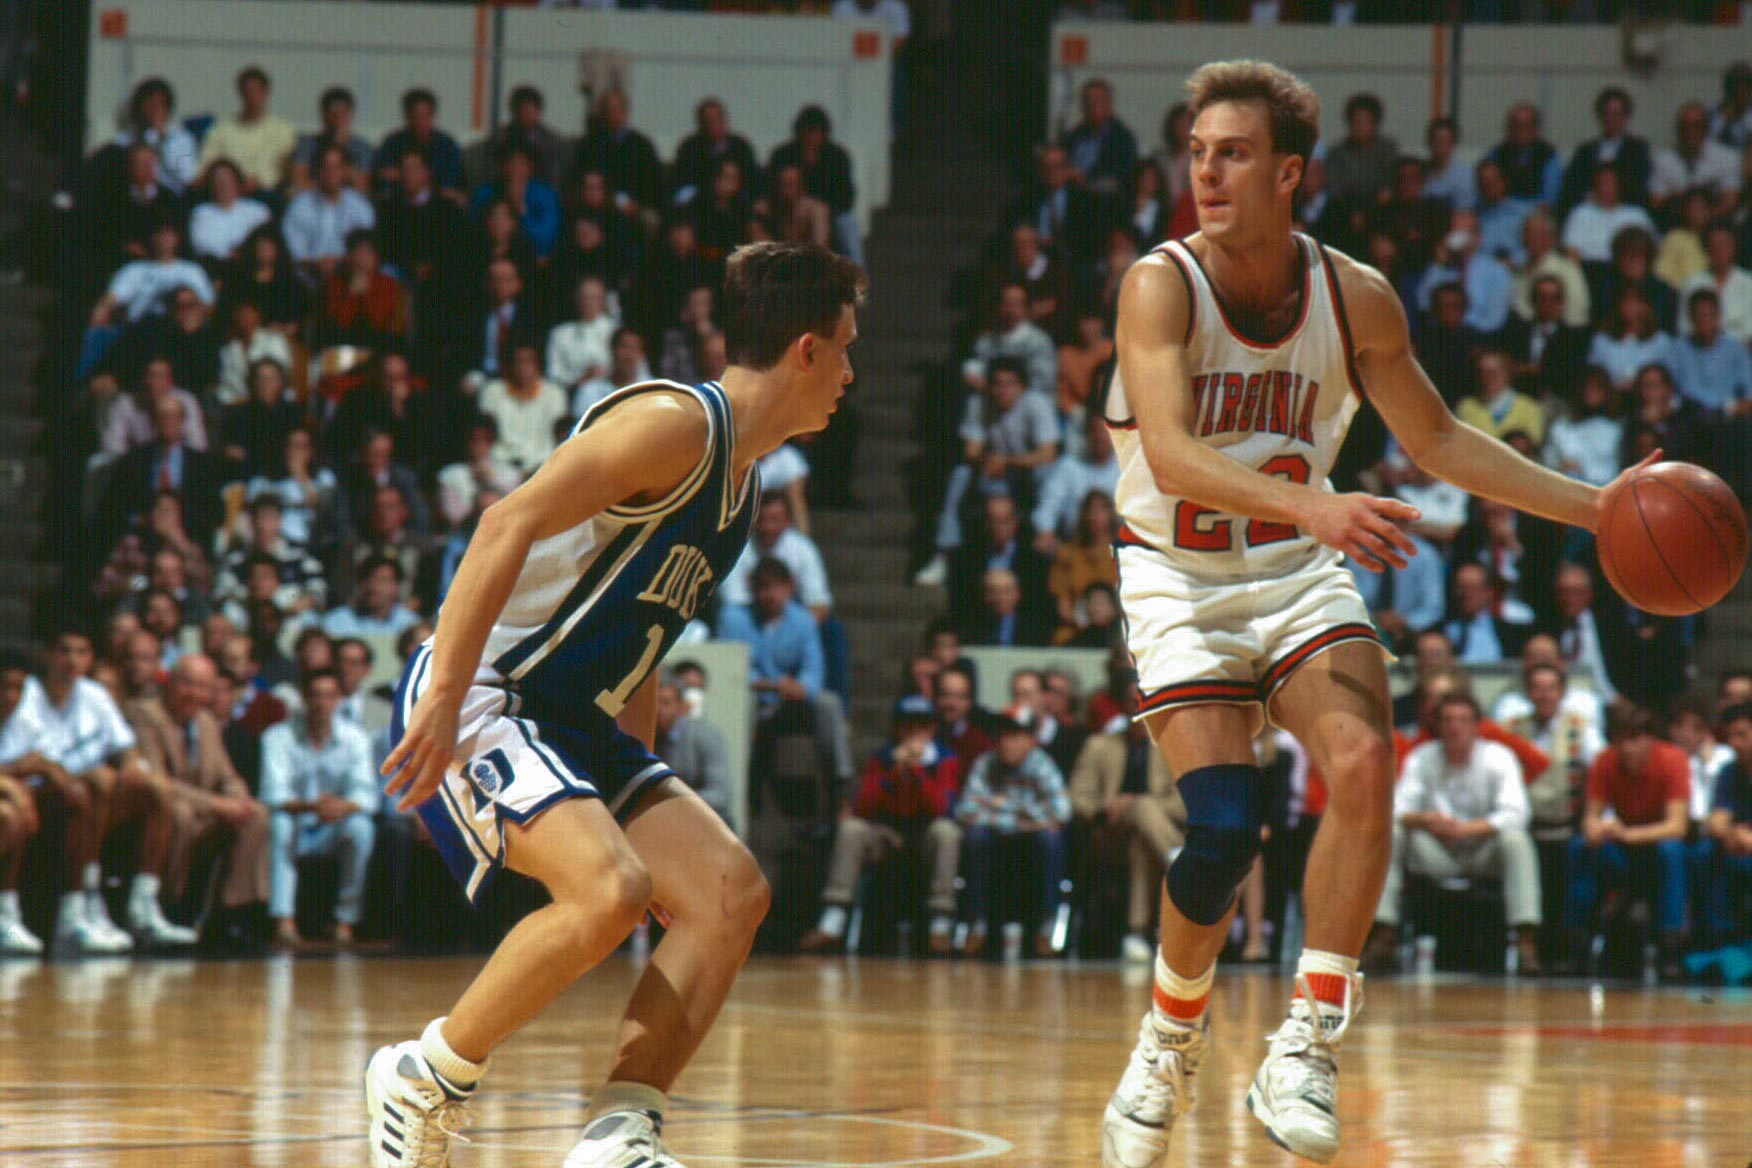 John Crotty in a UVA basketball uniform dribbling the ball during a game